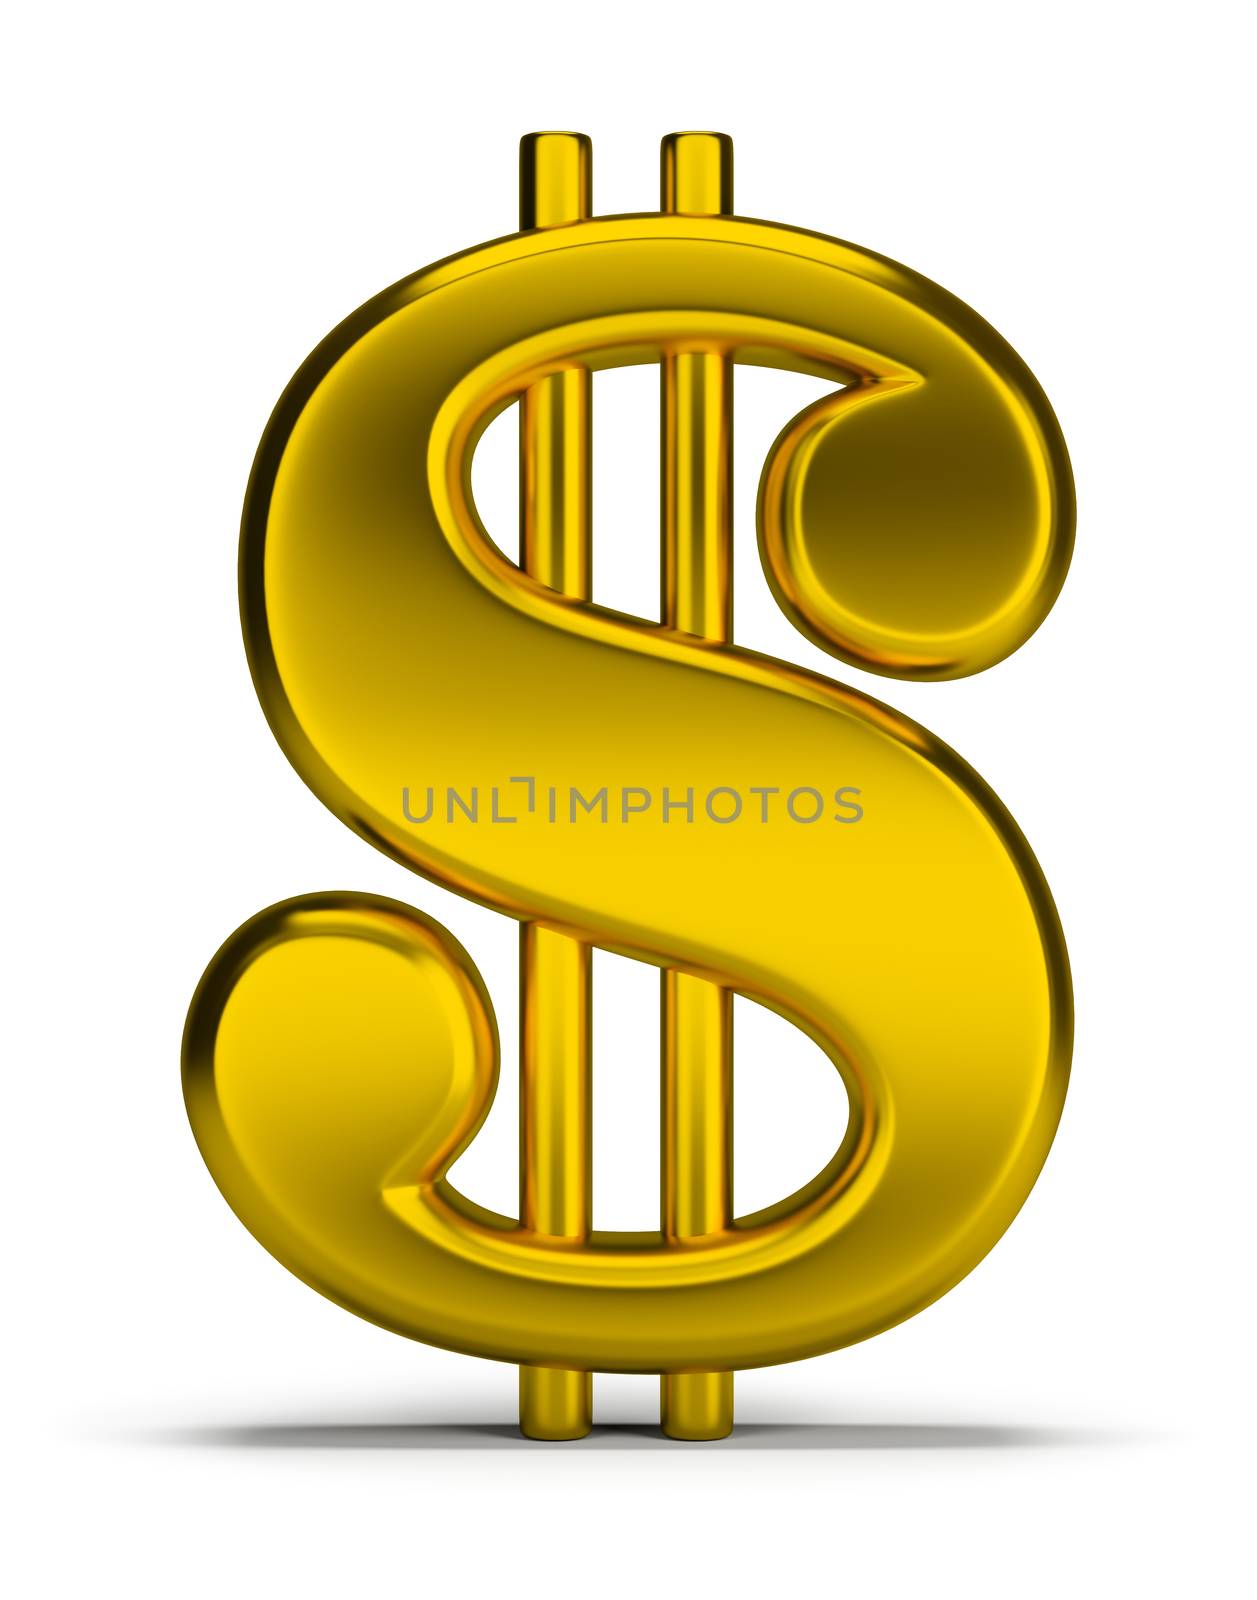 Gold dollar sign. 3d image. Isolated white background.